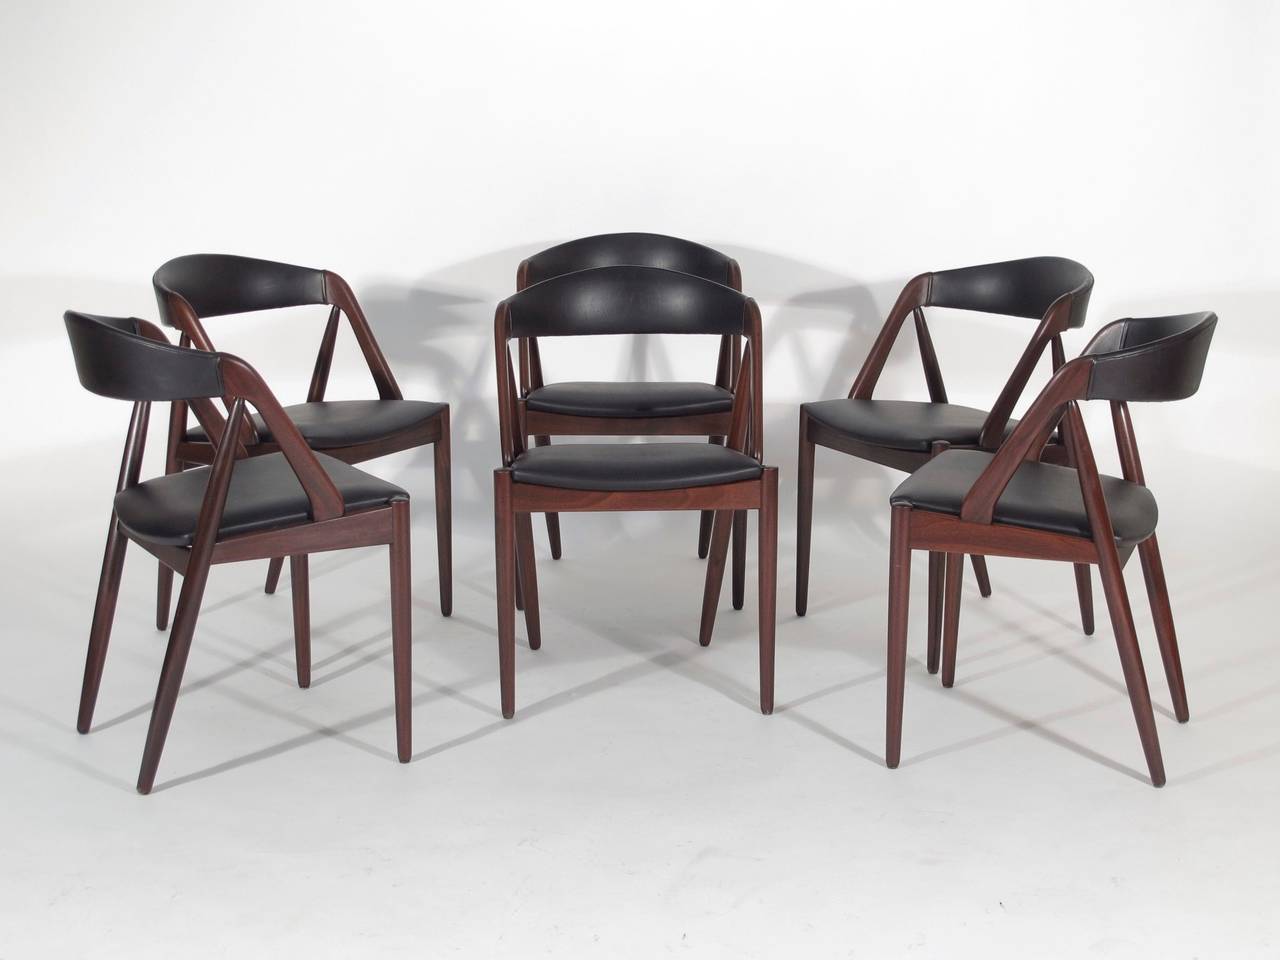 20th Century Mid-Century Kai Kristiansen Curved Back Dining Chairs 45+ Available